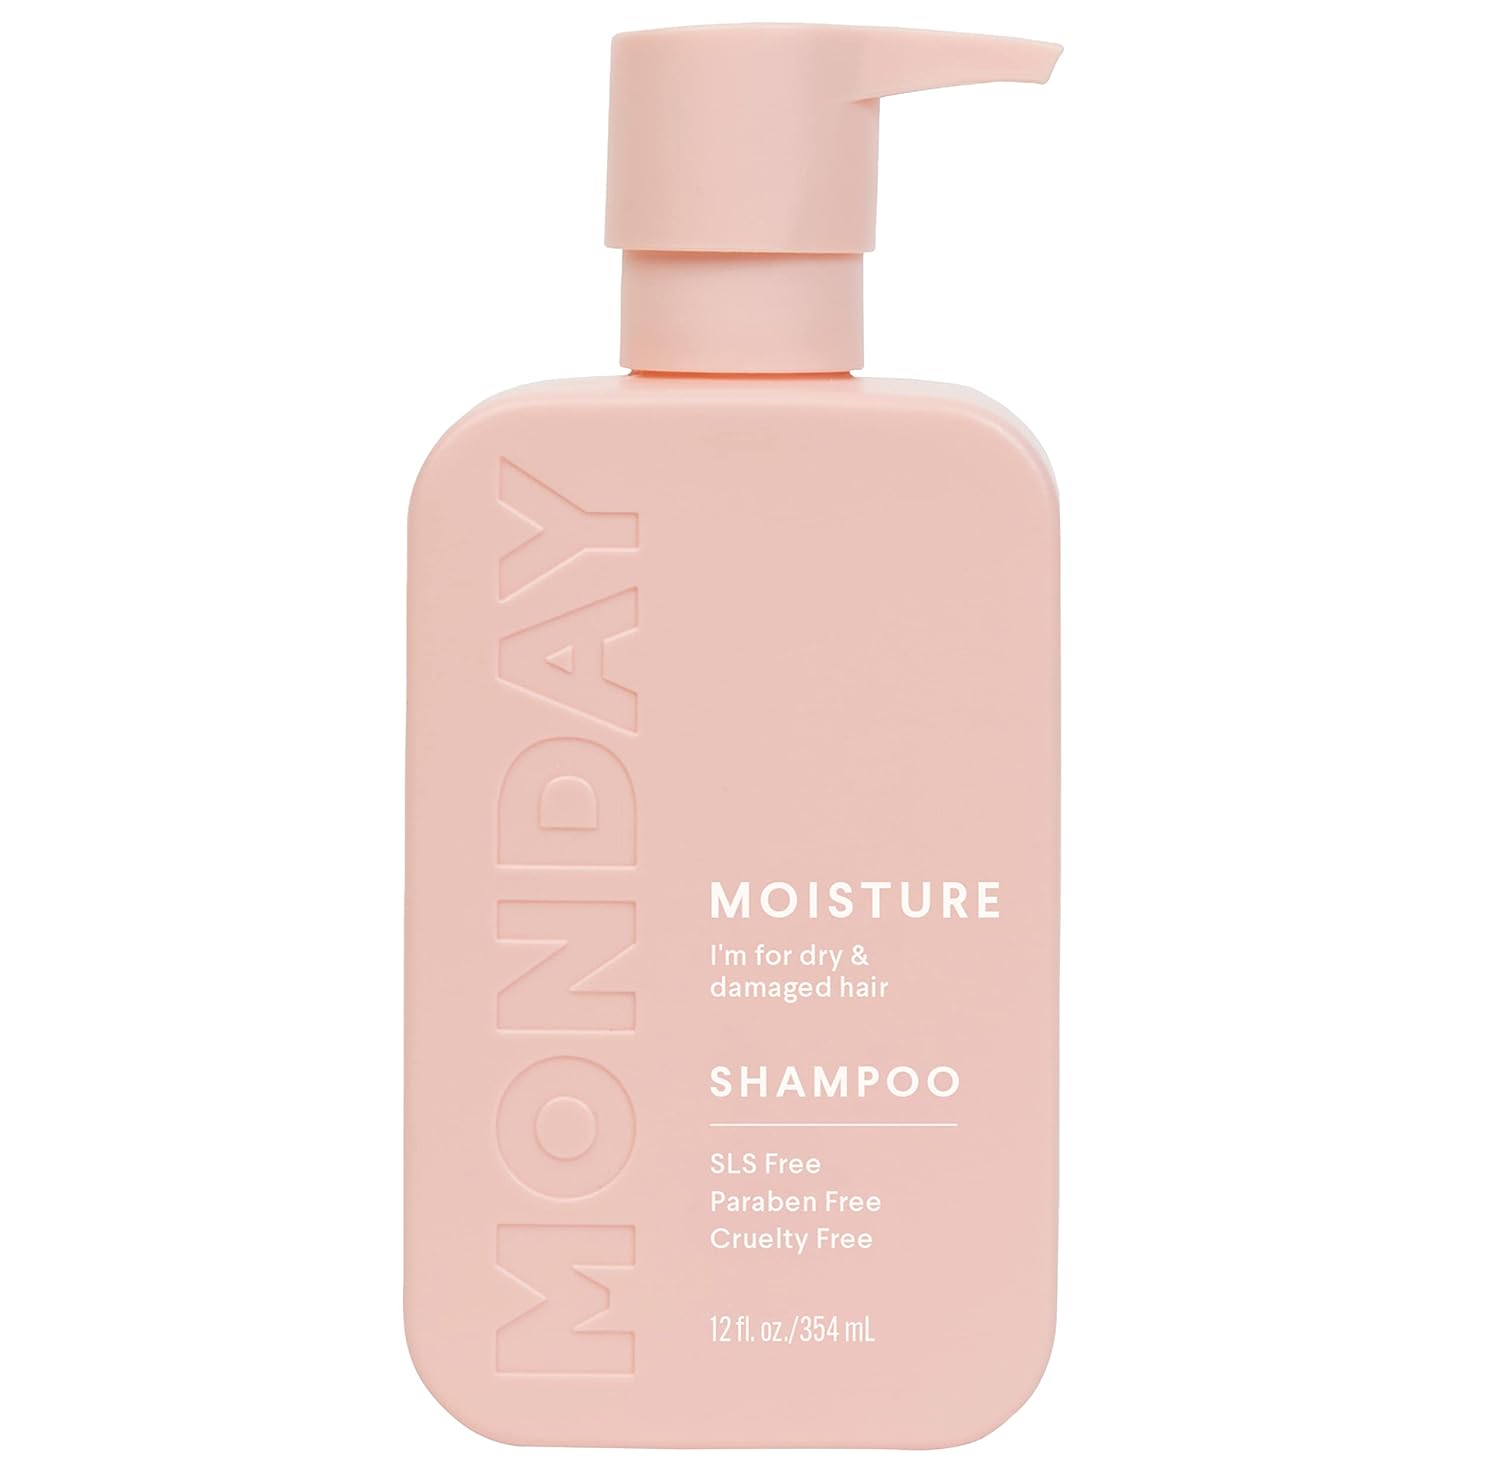 Monday Haircare Moisture Shampoo (Amazon Exclusive) 30Oz For Dry, Coarse, Stressed, Coily And Curly Hair, Made From Coconut Oil, Rice Protein, Shea Butter,  Vitamin E, All-Natural